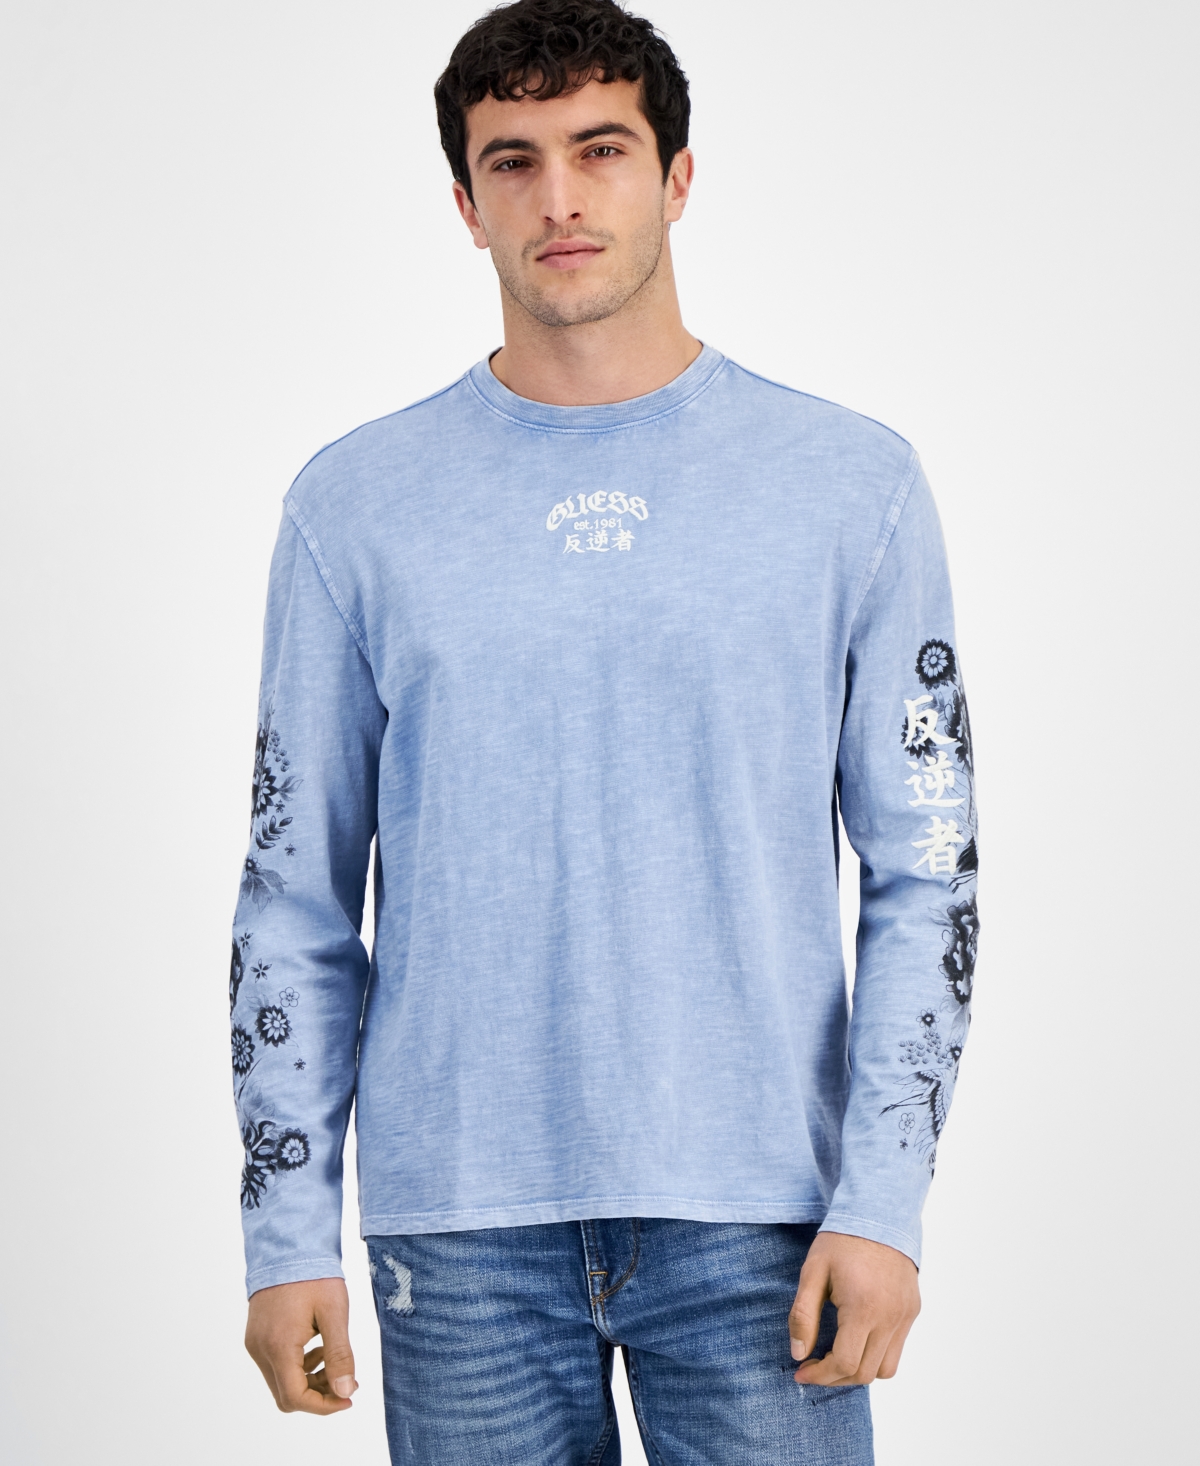 Guess Men's Embroidered Long Sleeve T-shirt In Nimbus Blue Multi